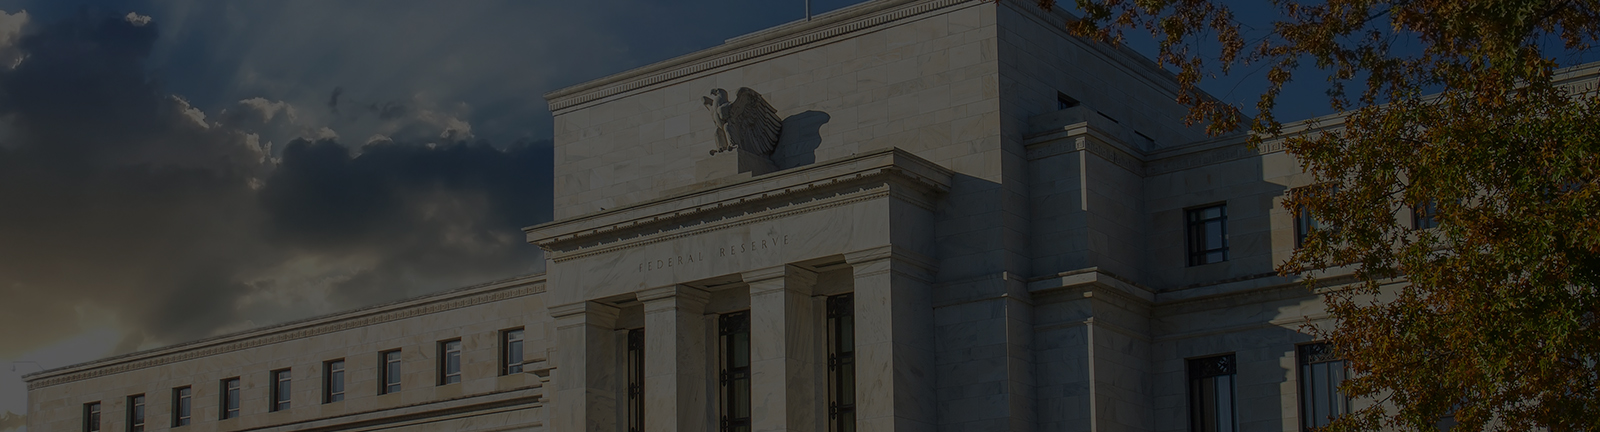 A dovish Federal Reserve: a ray of hope for capital markets